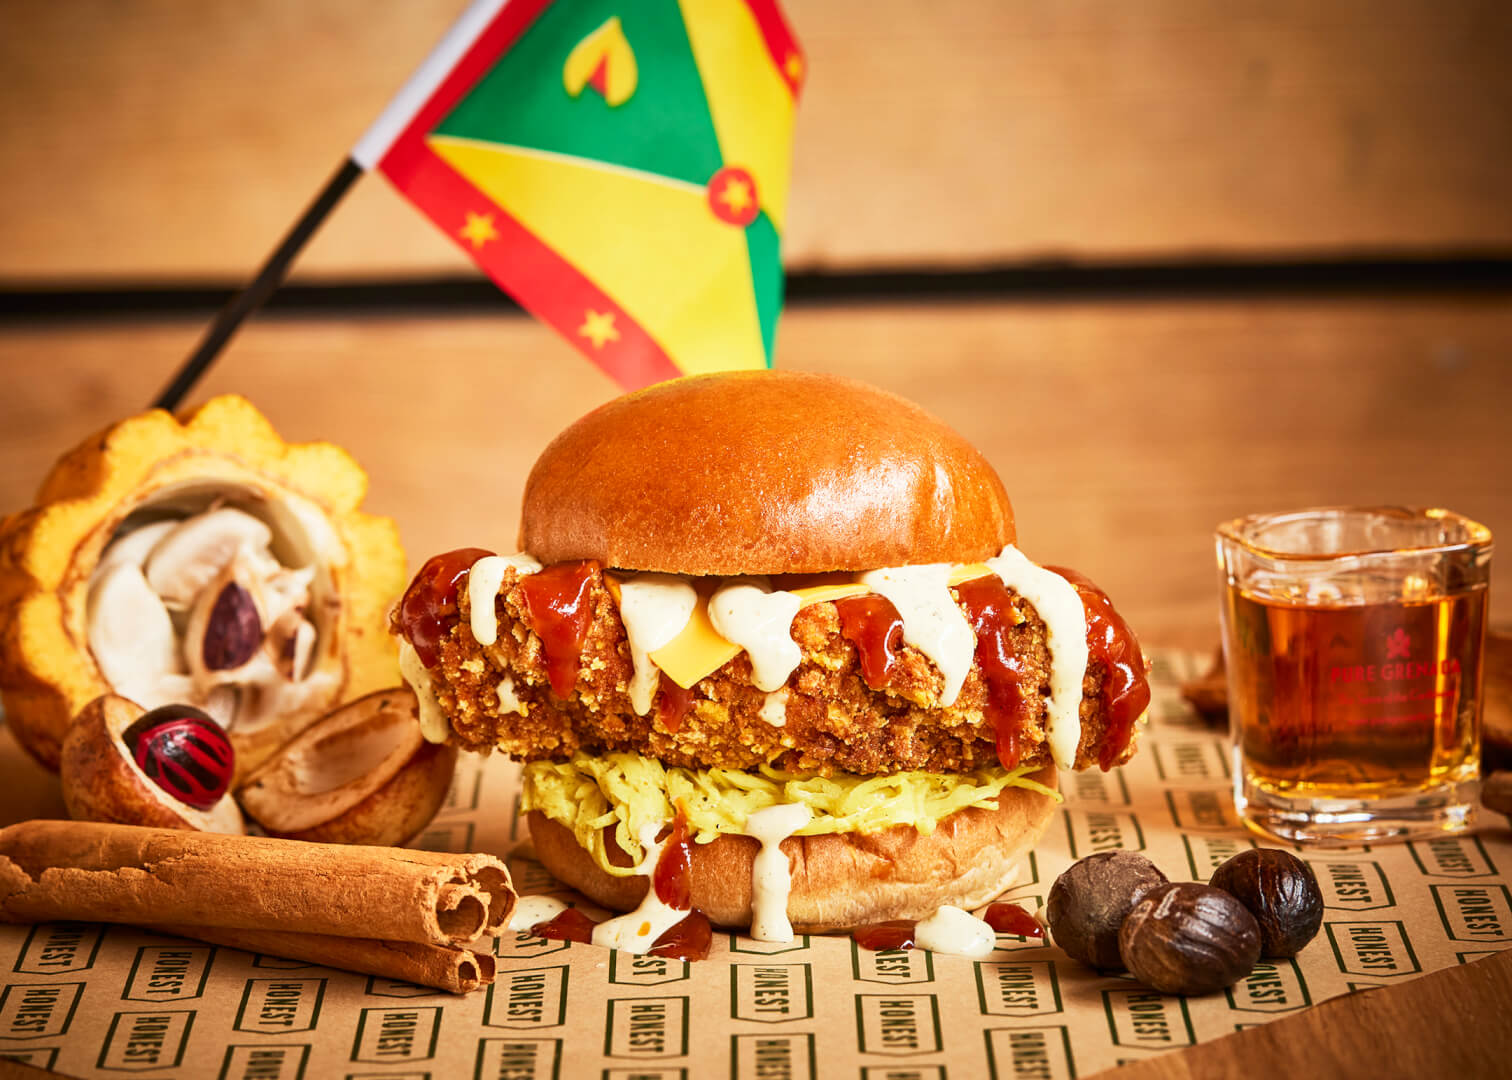 Caribbean fried chicken burger with cheese